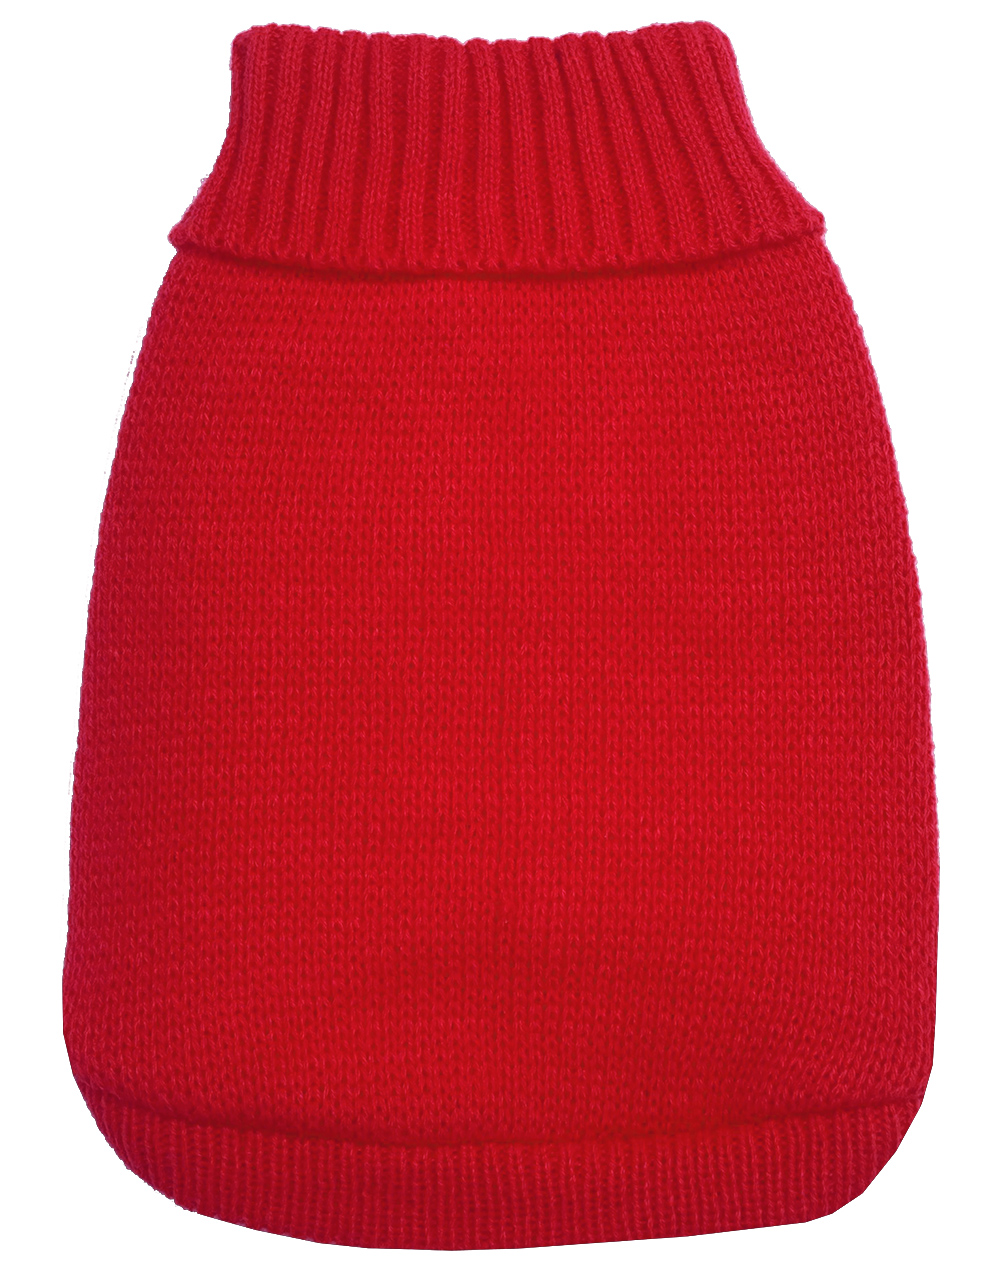 Knit Pet Sweater Red Size Small